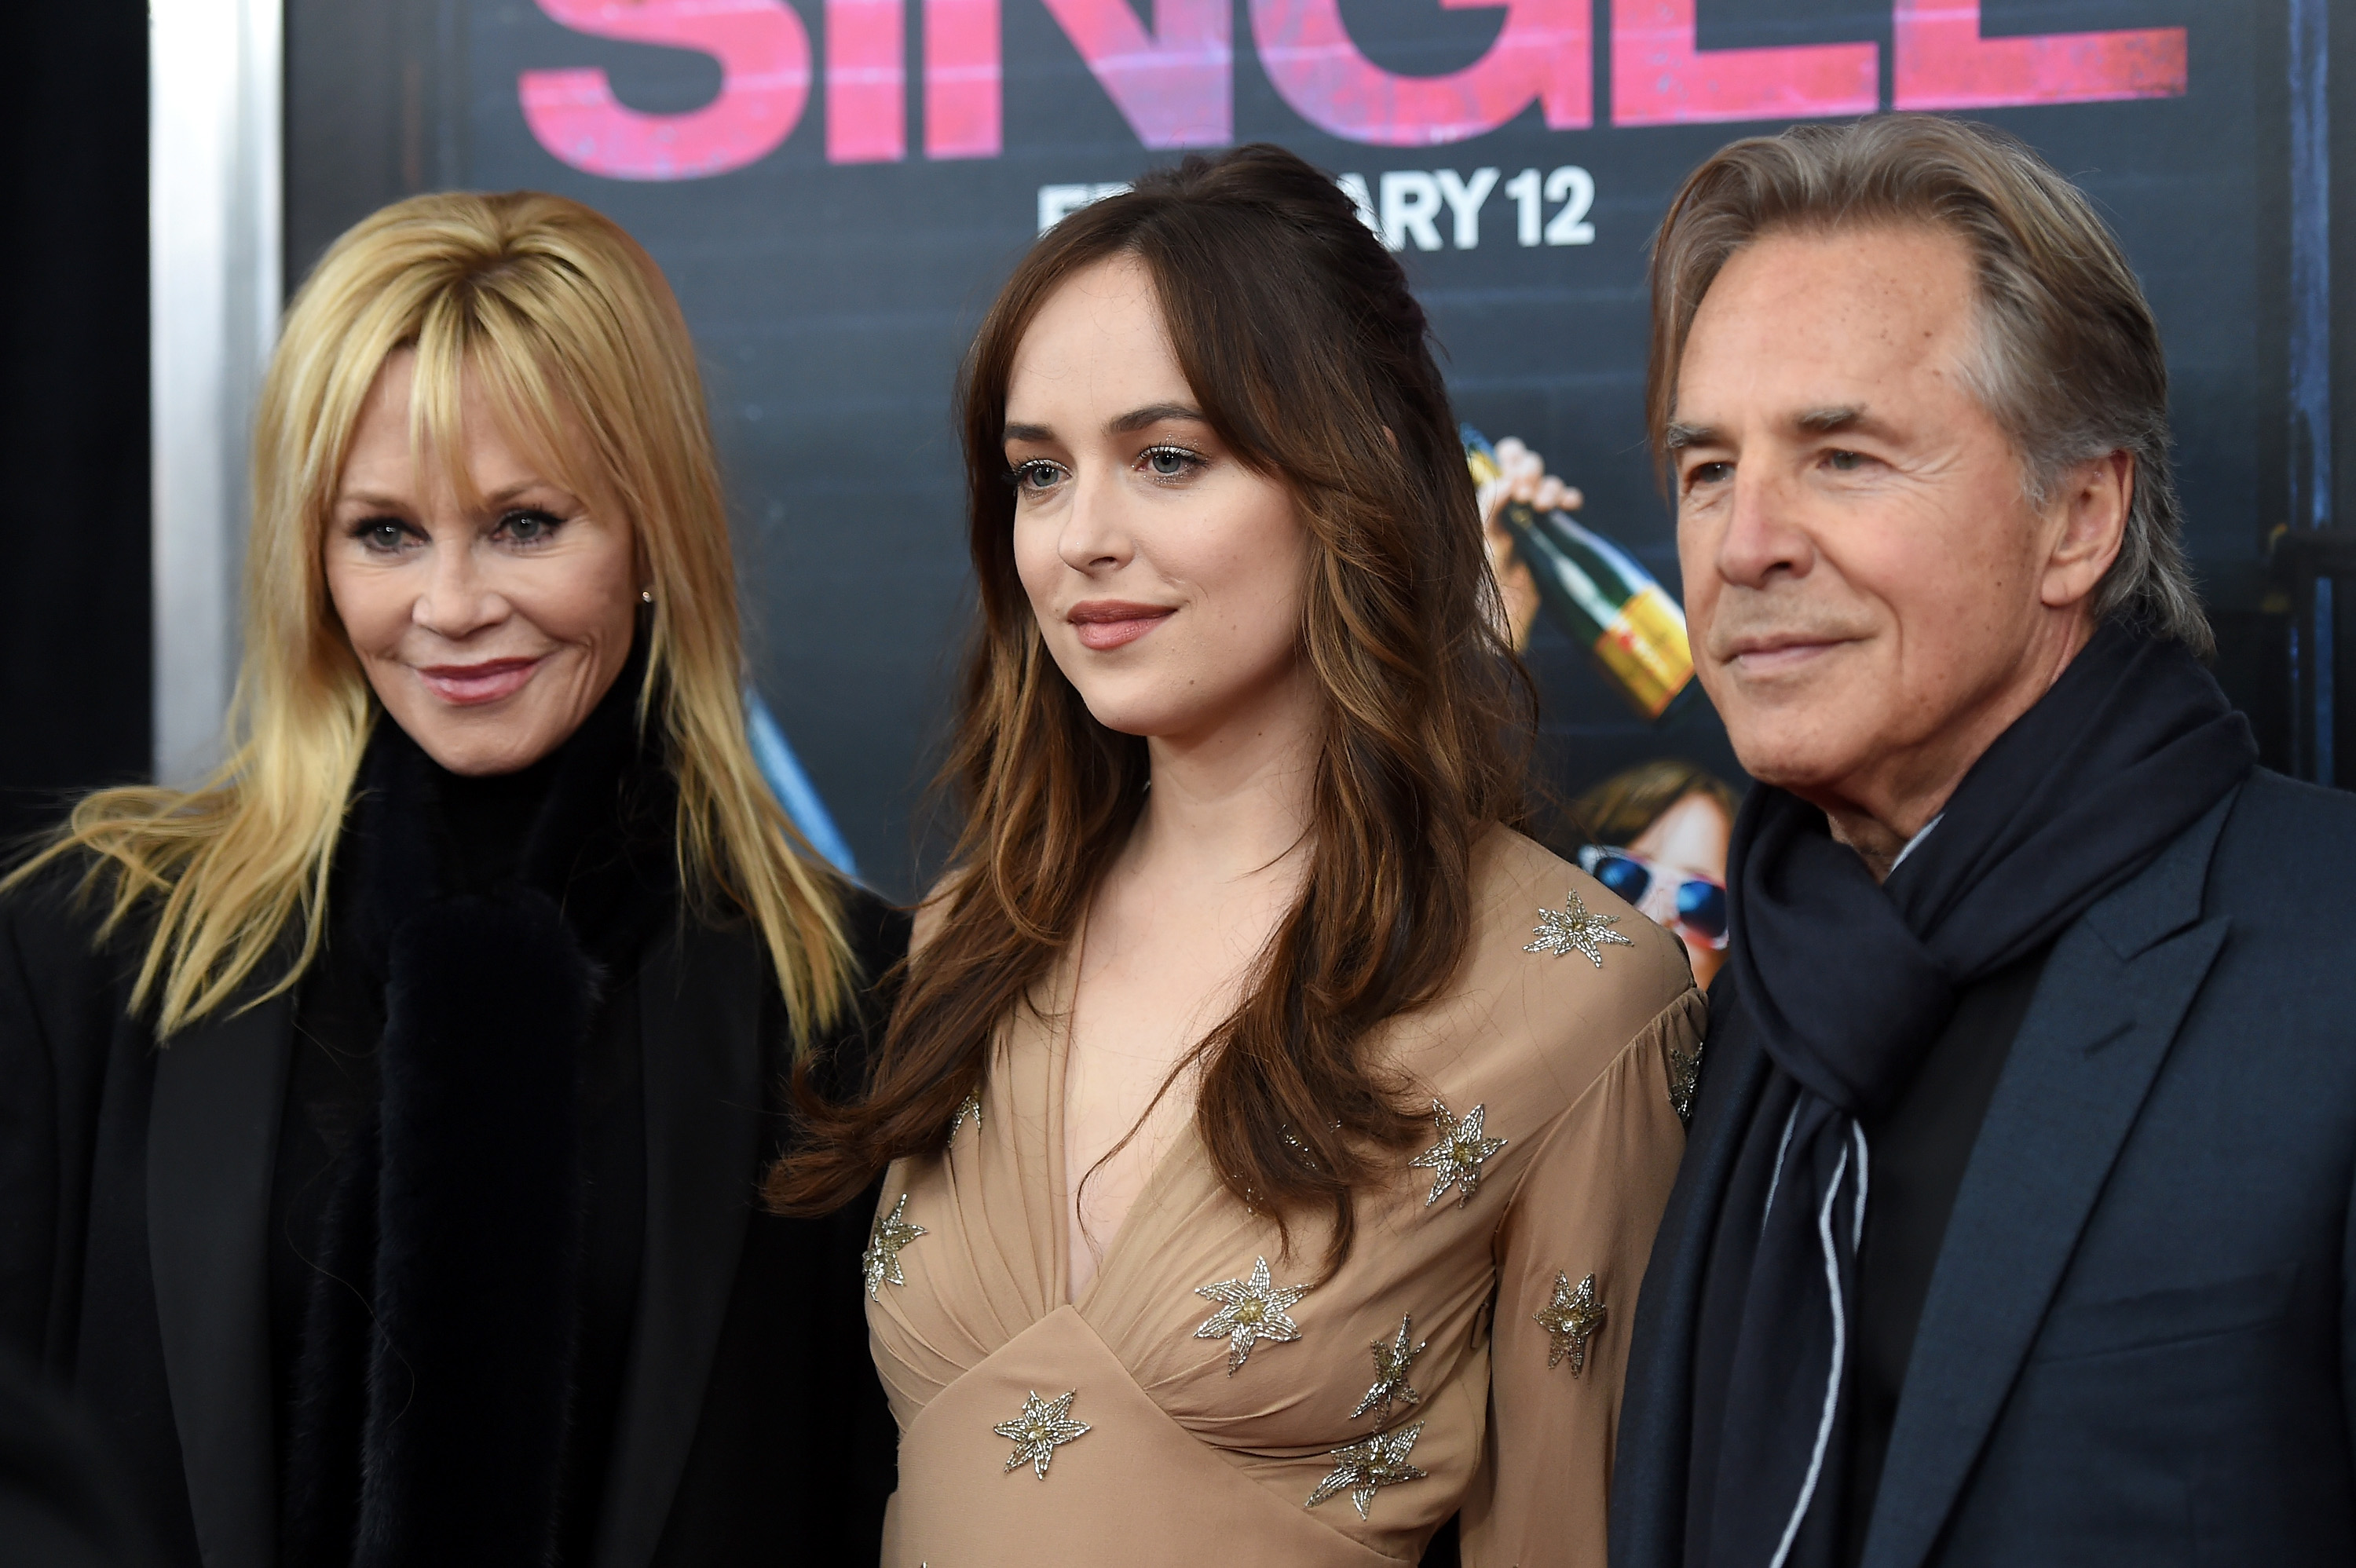 Melanie Griffith, Dakota and Don Johnson at the premiere of "How To Be Single" in New York City on February 3, 2016. | Source: Getty Images